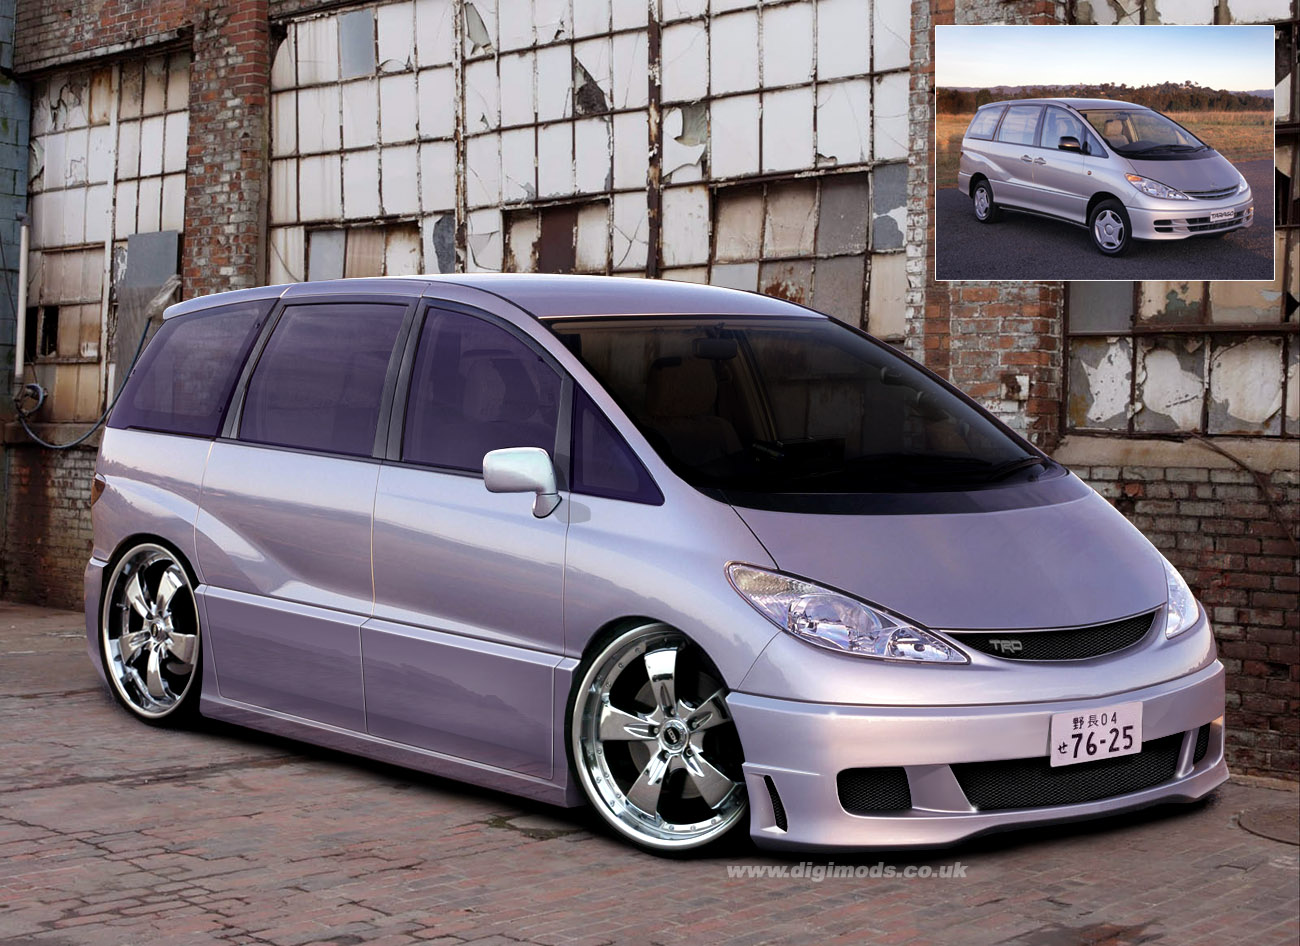 specification for toyota previa #1